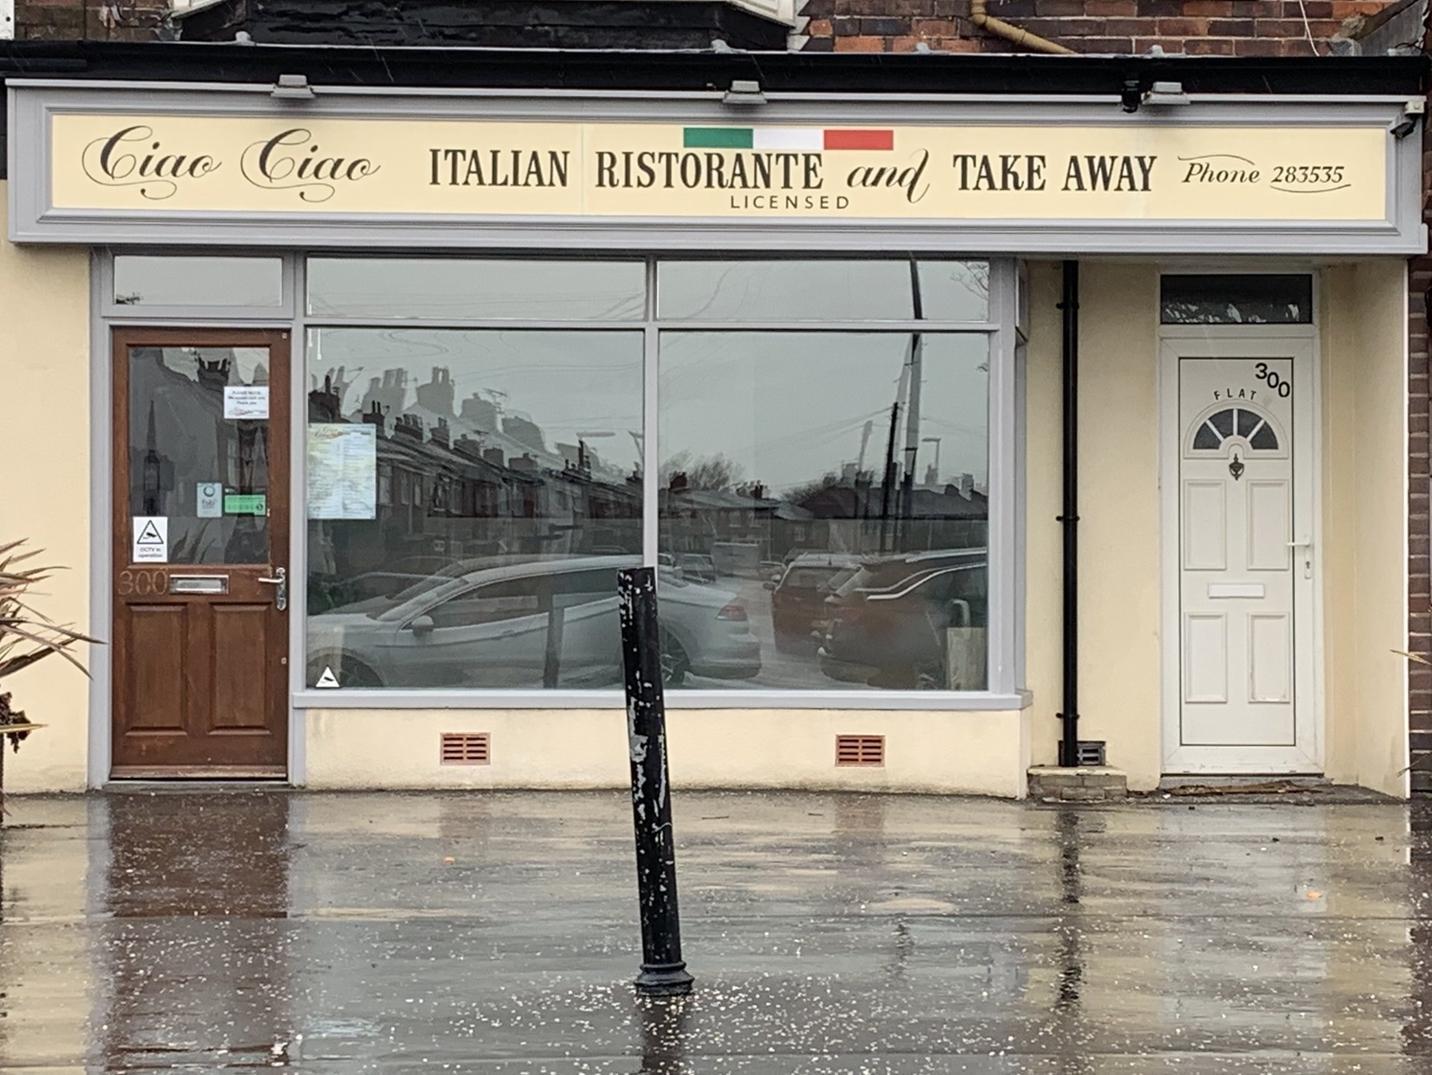 300 Devonshire Road, Blackpool - "Best Italian in Blackpool! Small but the atmosphere and food was amazing Couldnt recommend enough , will definitely be visiting again"